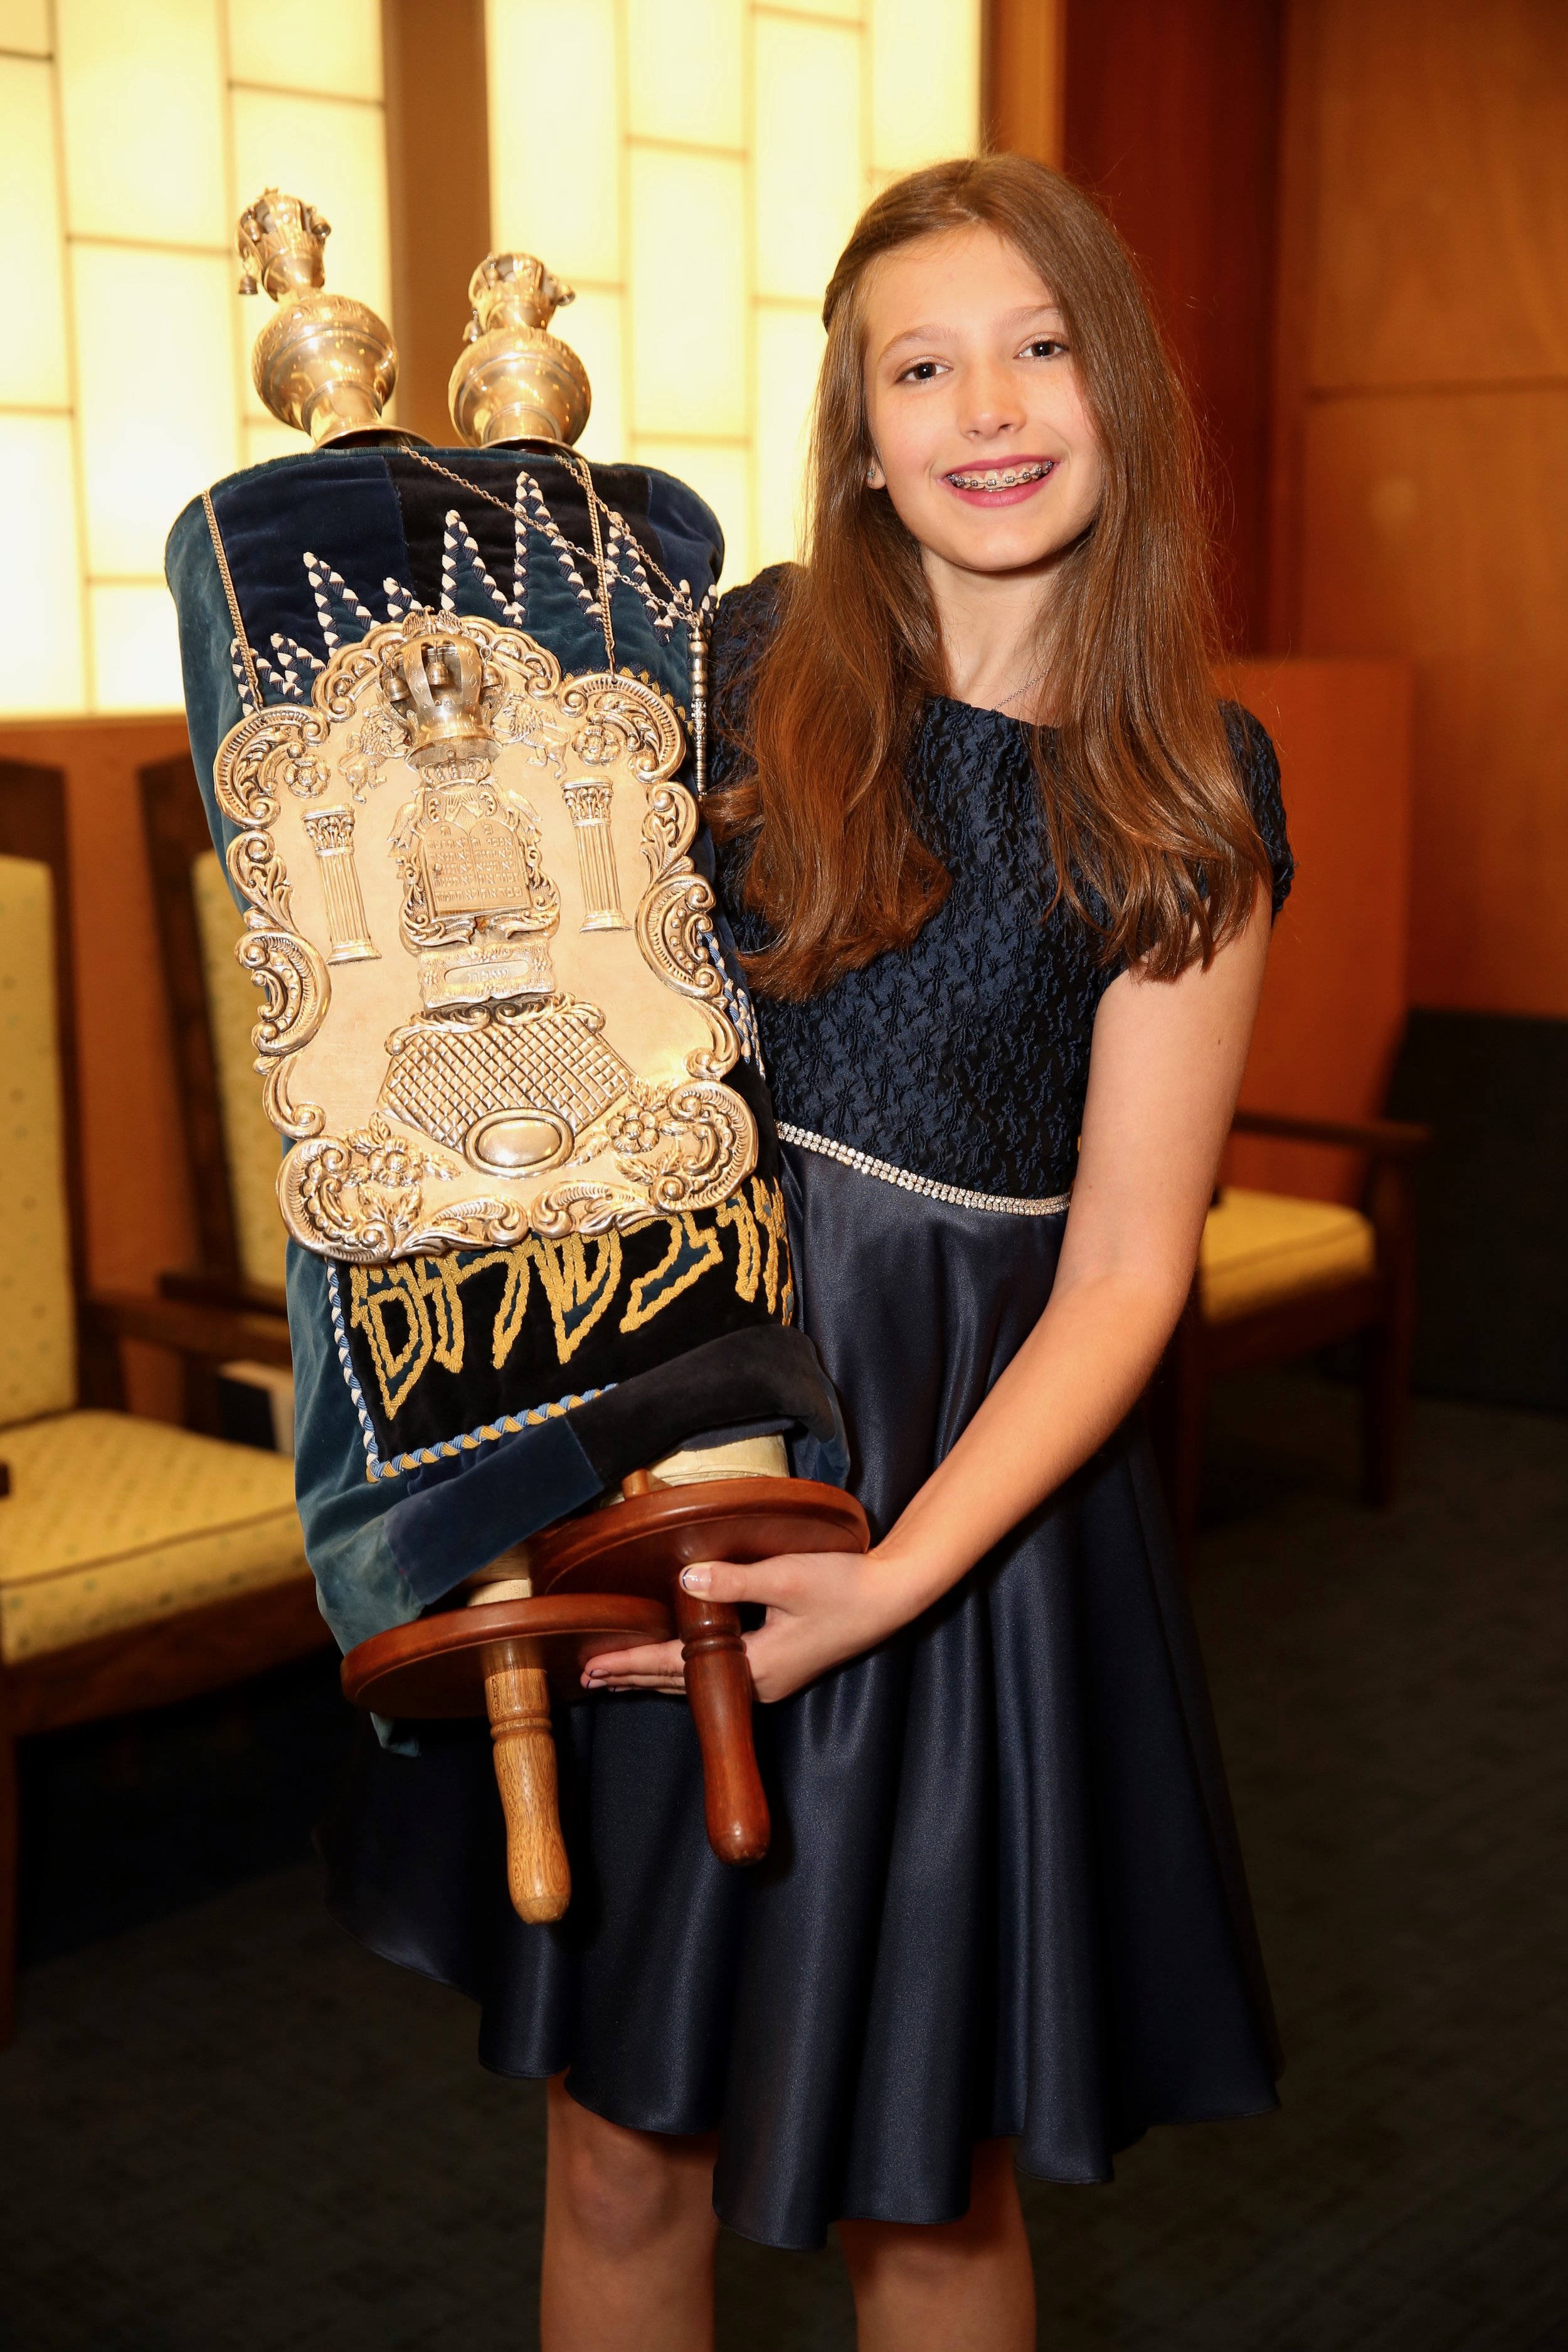 Bat Mitzvah Service at Temple Israel of Northern Westchester, New York